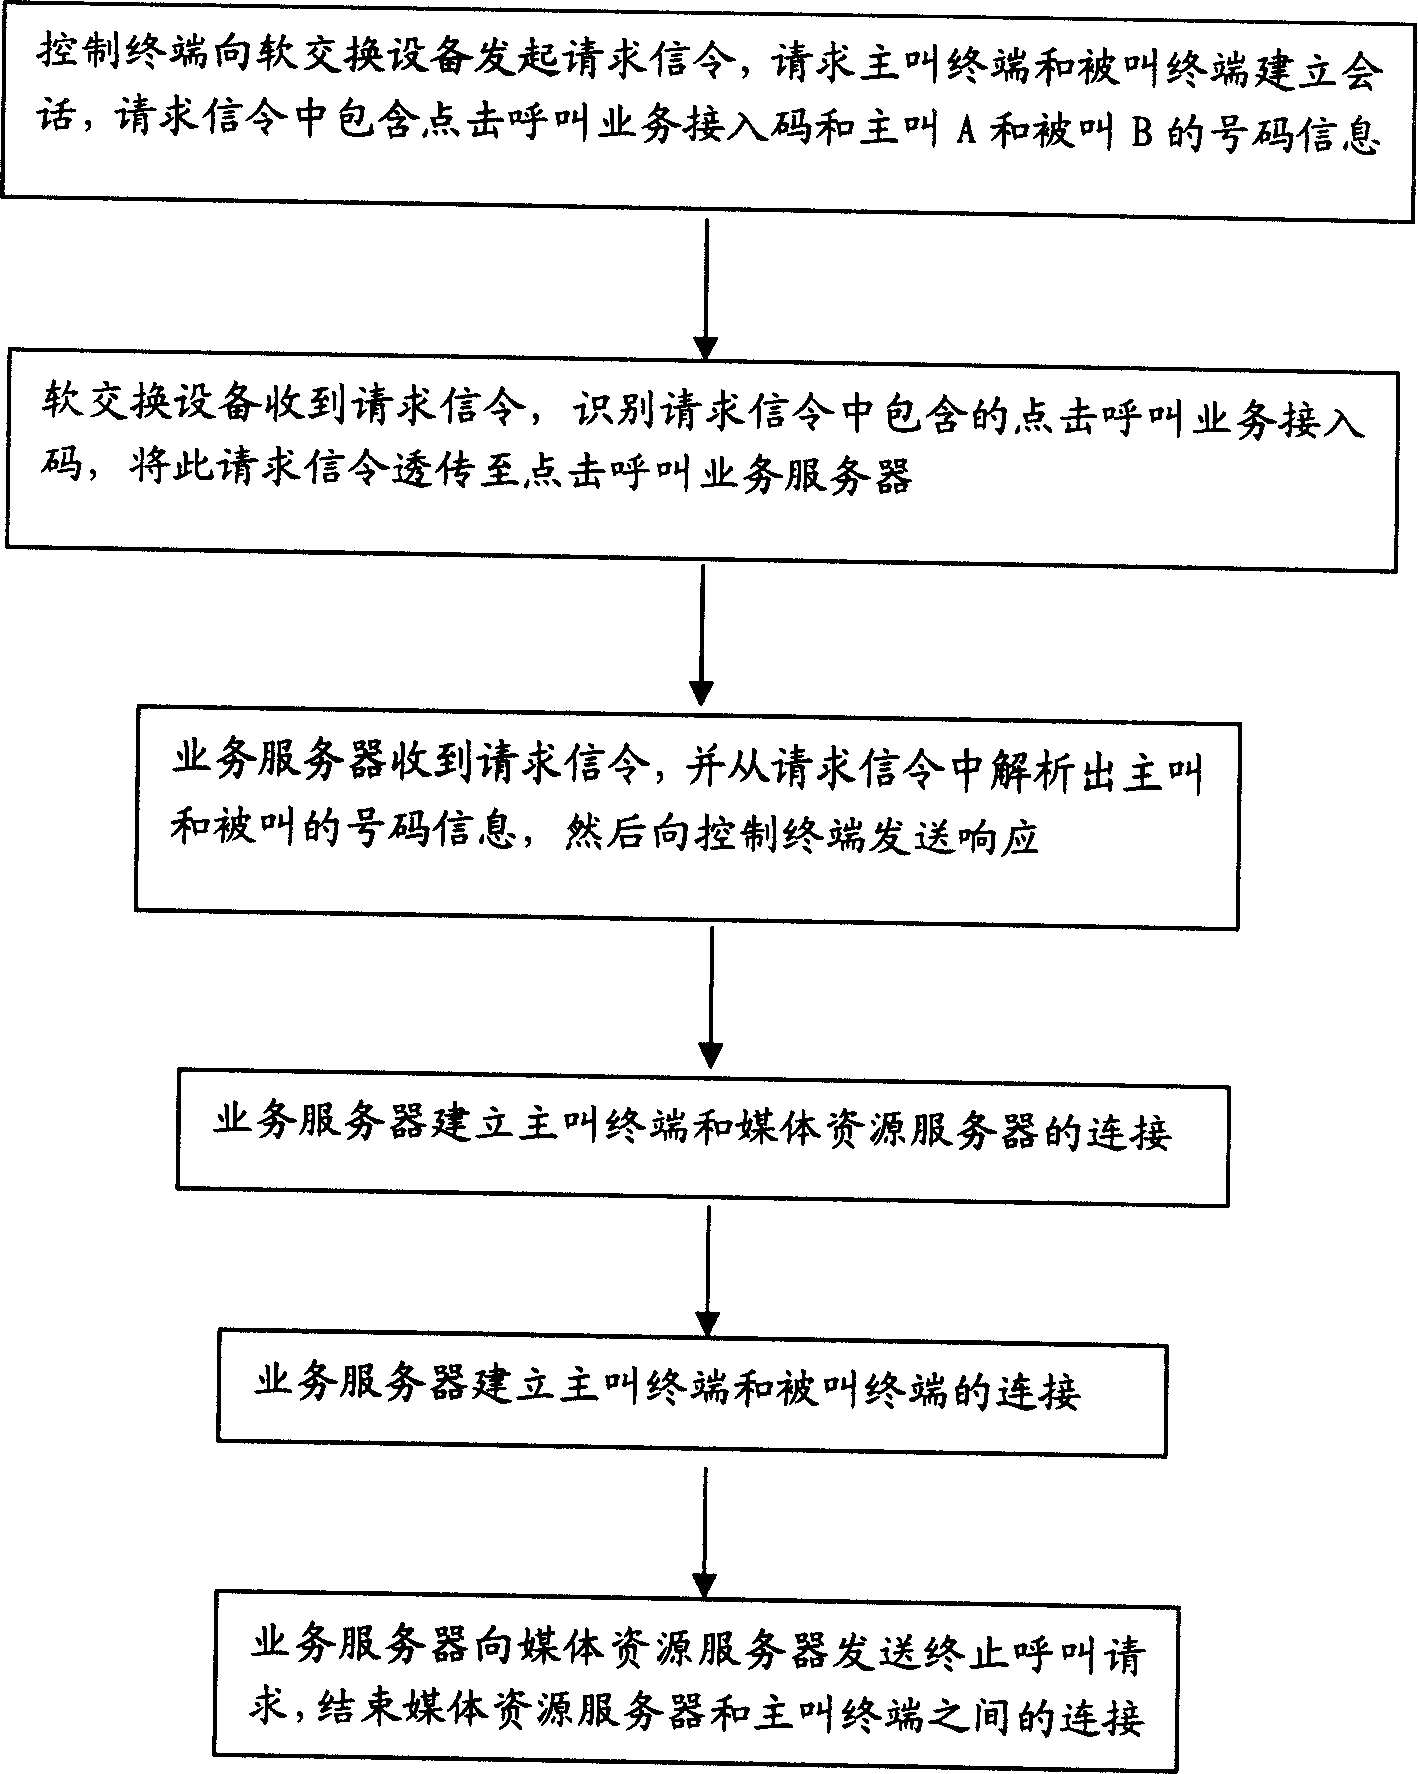 Method and system for implementing call making service